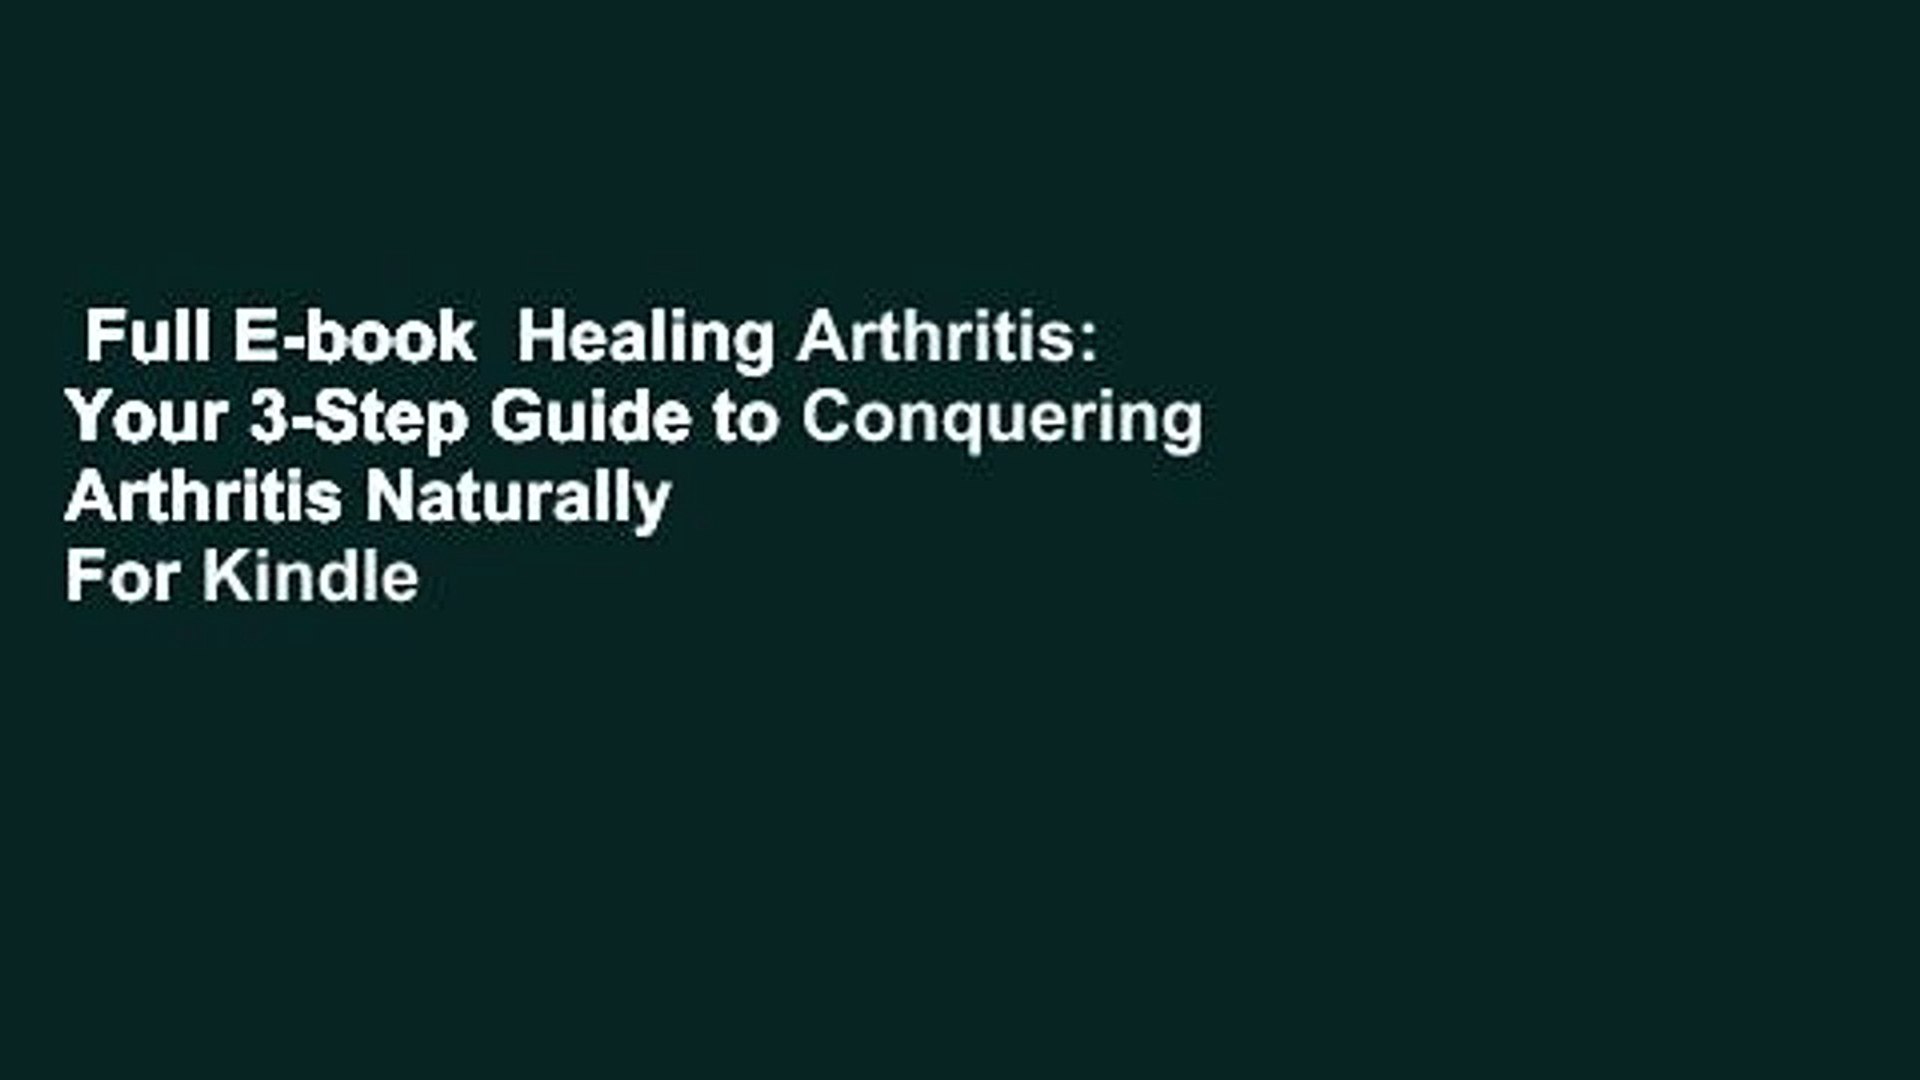 Healing arthritis your 3 step guide to conquering arthritis naturally Full E Book Healing Arthritis Your 3 Step Guide To Conquering Arthritis Naturally For Kindle Video Dailymotion